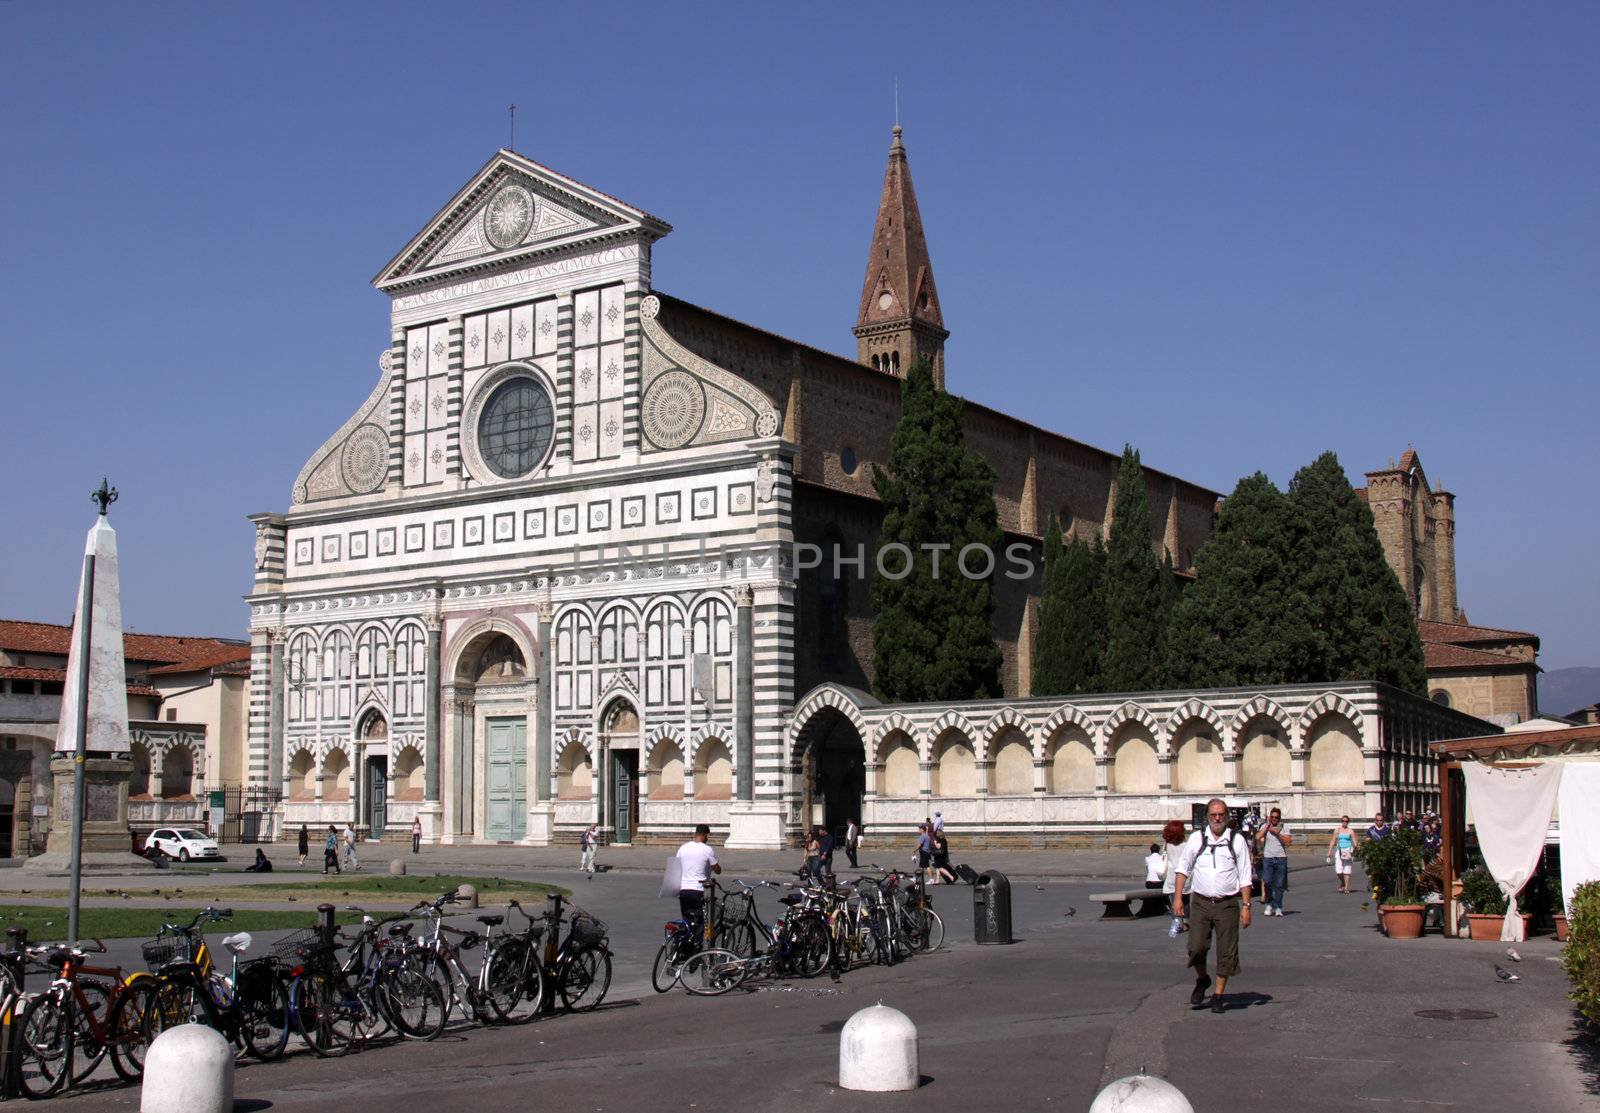 The facade of Santa Maria Novella, in Florence, Italy.  The cathedral was completed in 1470.
